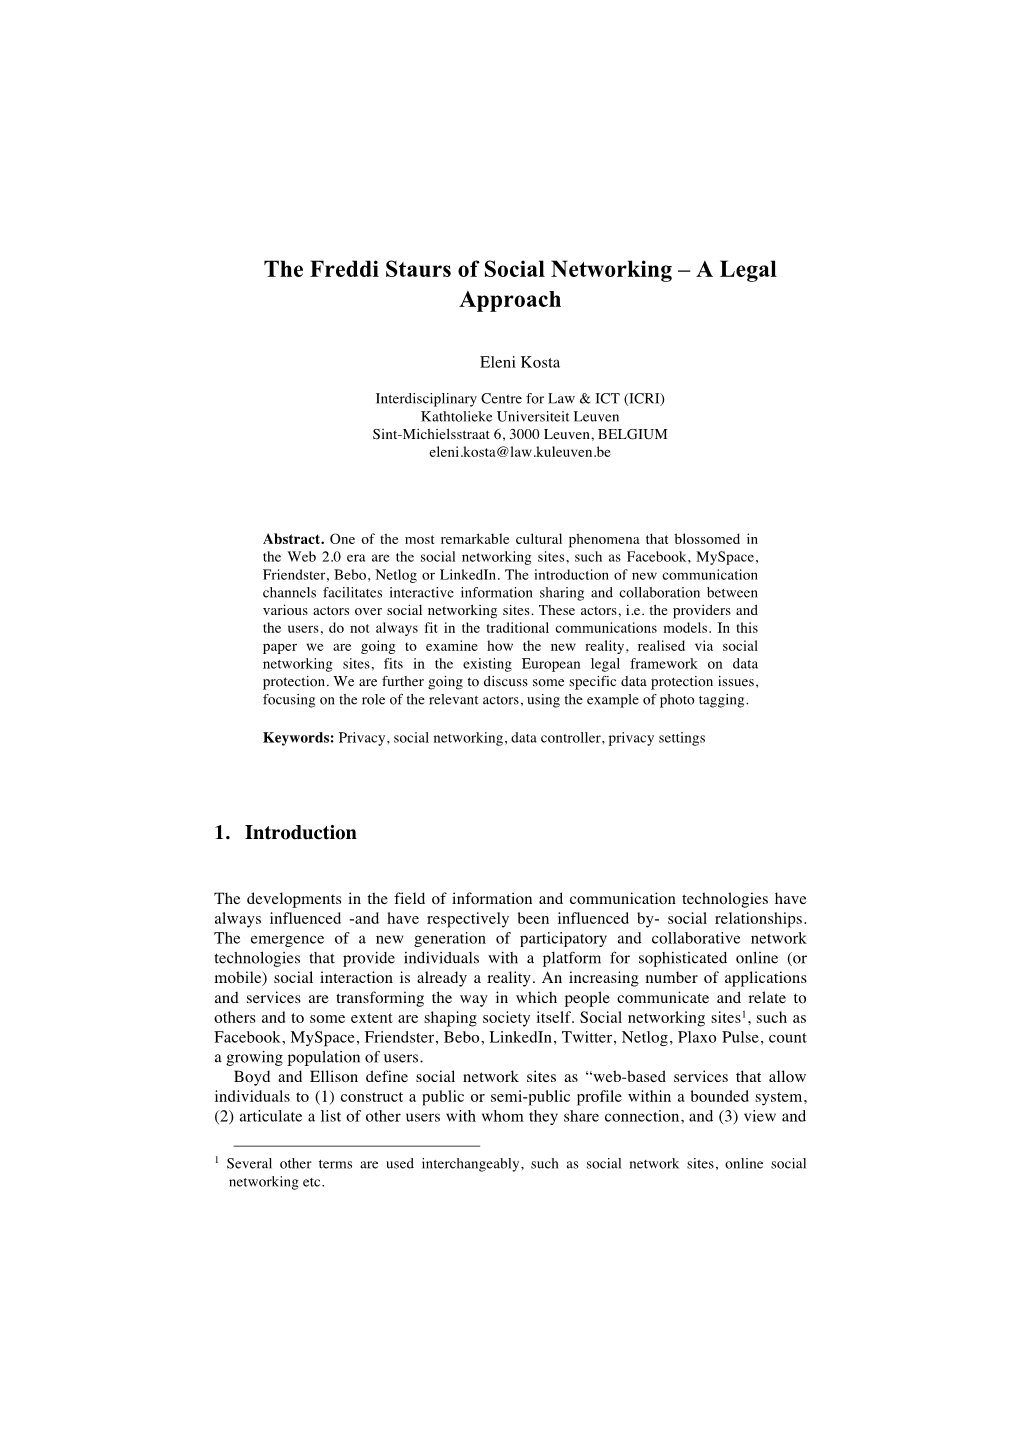 The Freddi Staurs of Social Networking – a Legal Approach